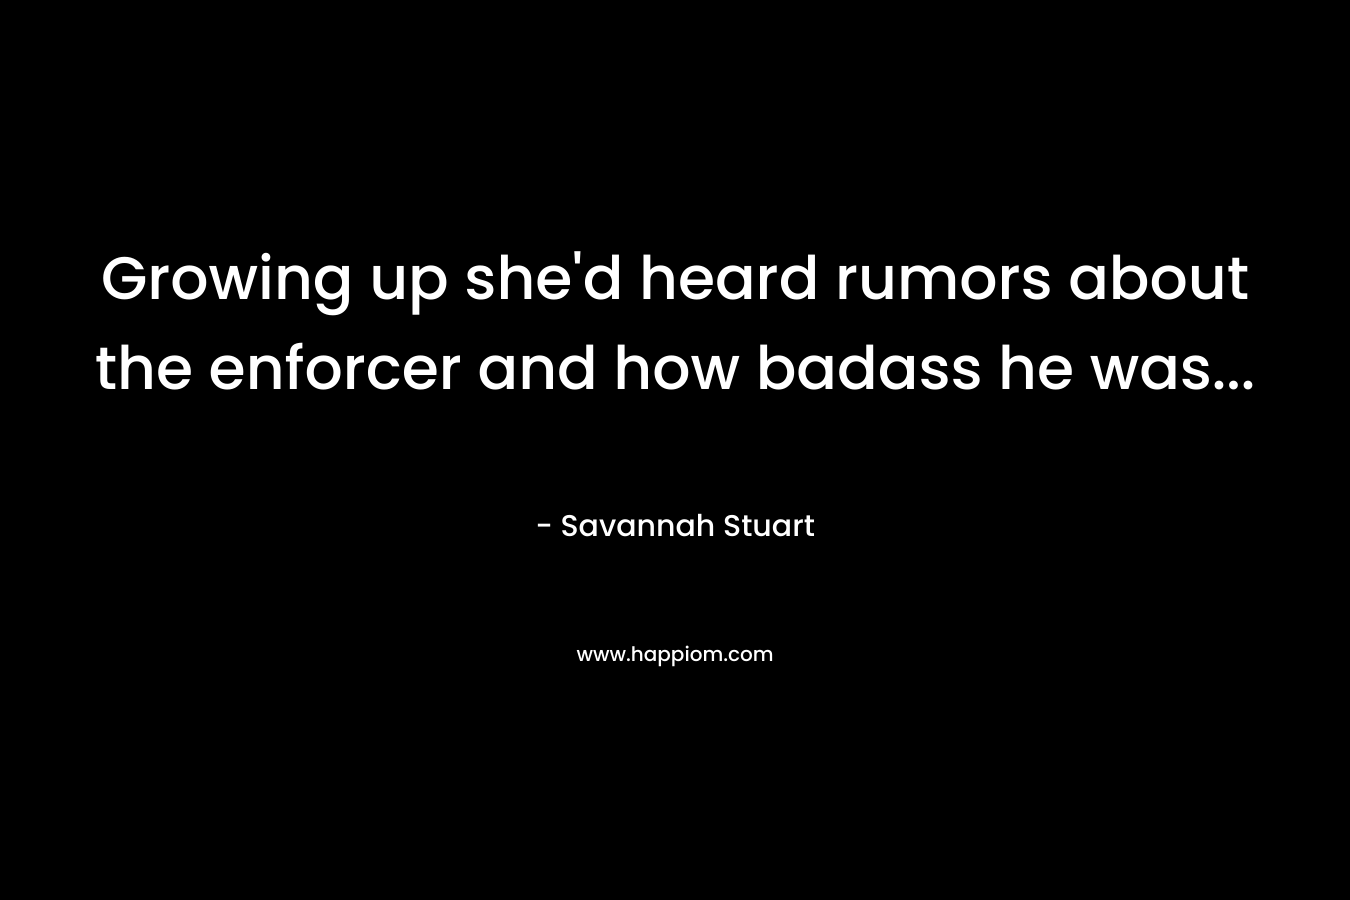 Growing up she’d heard rumors about the enforcer and how badass he was… – Savannah Stuart